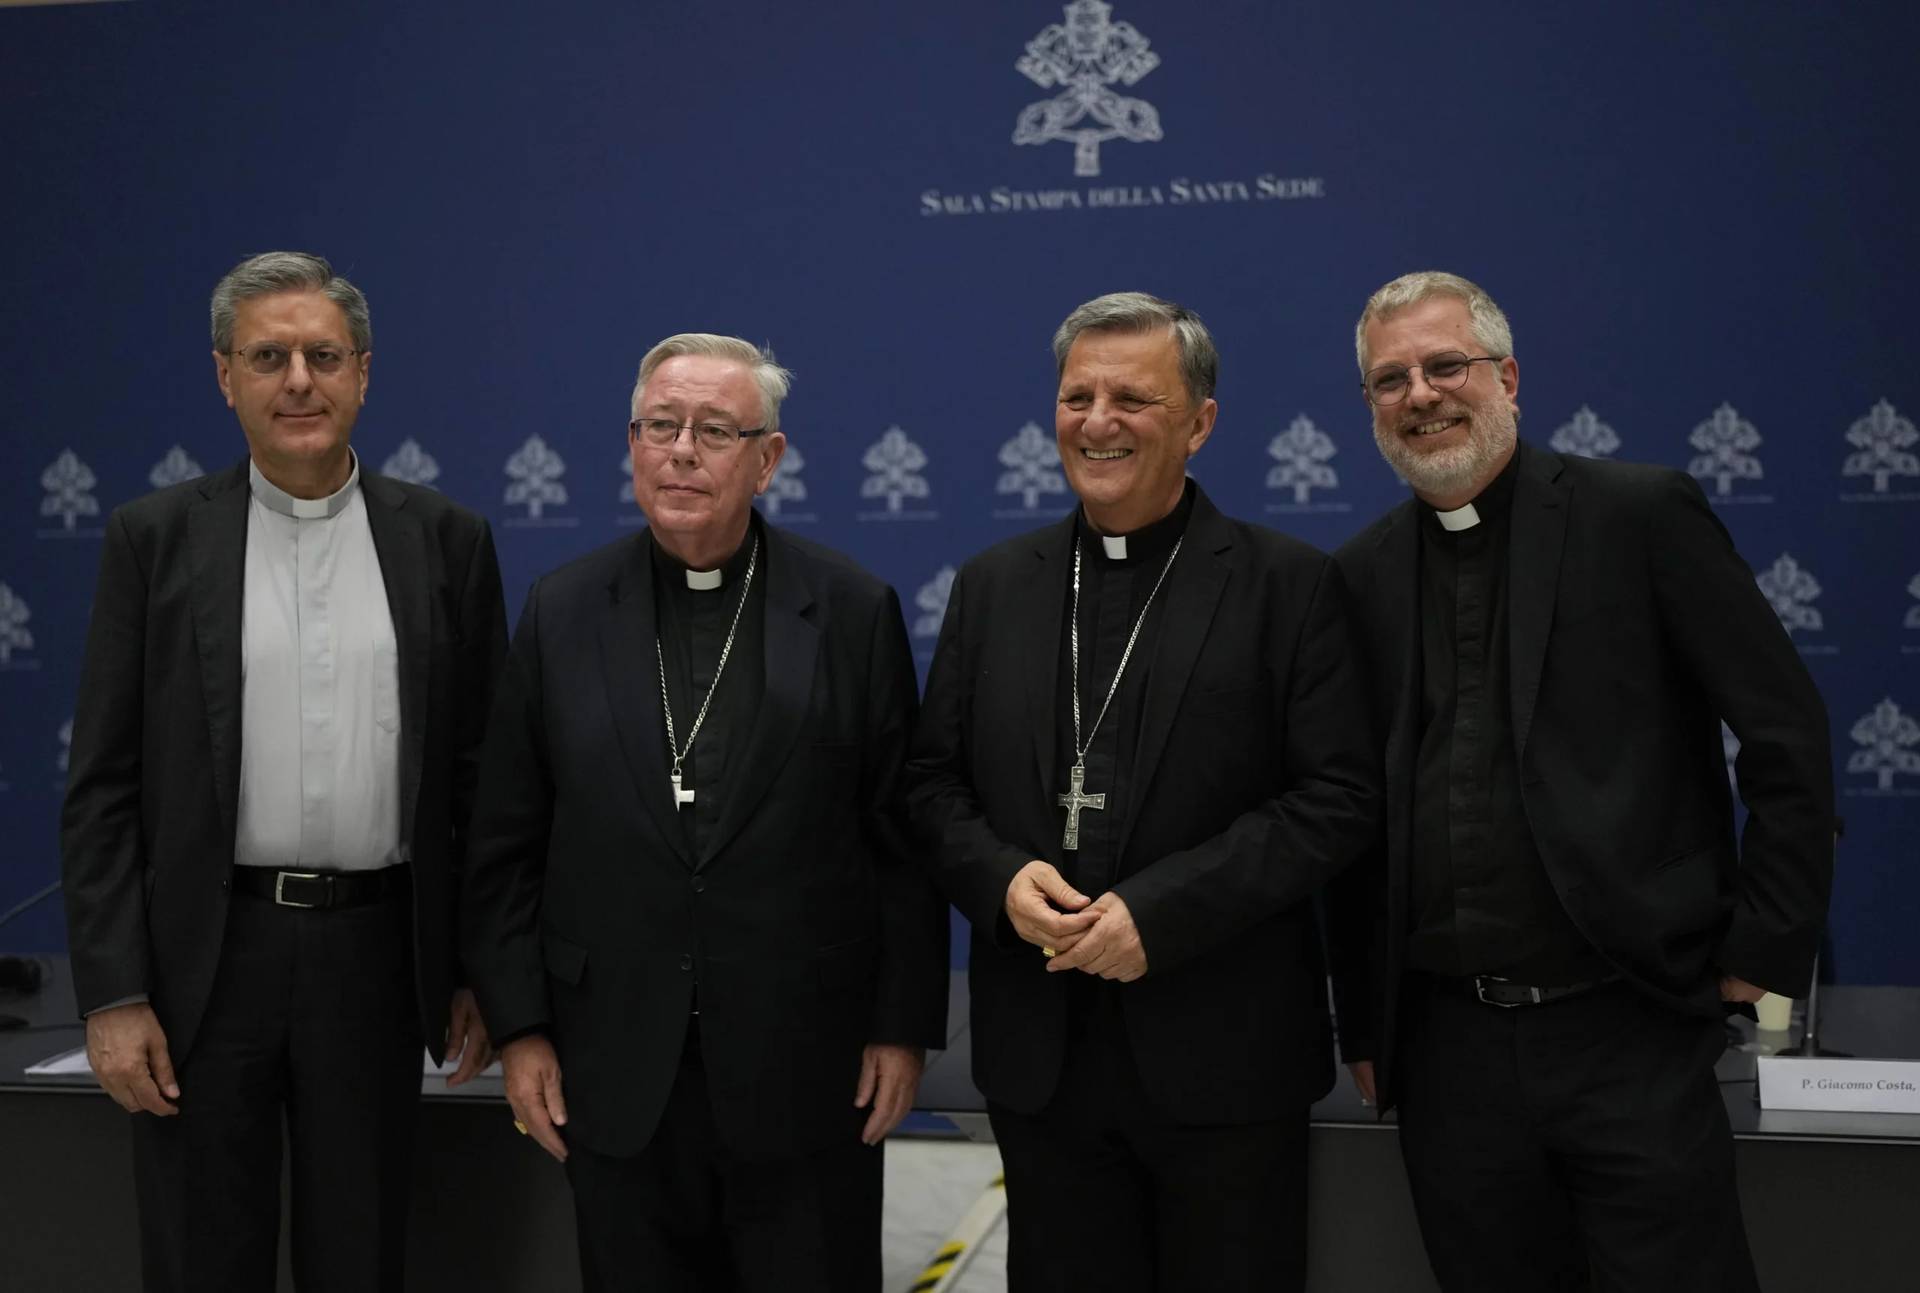 From left, Monsignor Riccardo Batocchio, Cardinal Jean-Claude Hollerich, Cardinal Mario Grech and Father Giacomo Costa pose for a photo after a press conference to present the “Instrumentum Laboris”, a preparatory document in view of the 16th Ordinary General Assembly of the Synod of Bishops, at the Vatican,Tuesday, July 9, 2024. (Credit: Alessandra Tarantino/AP.)